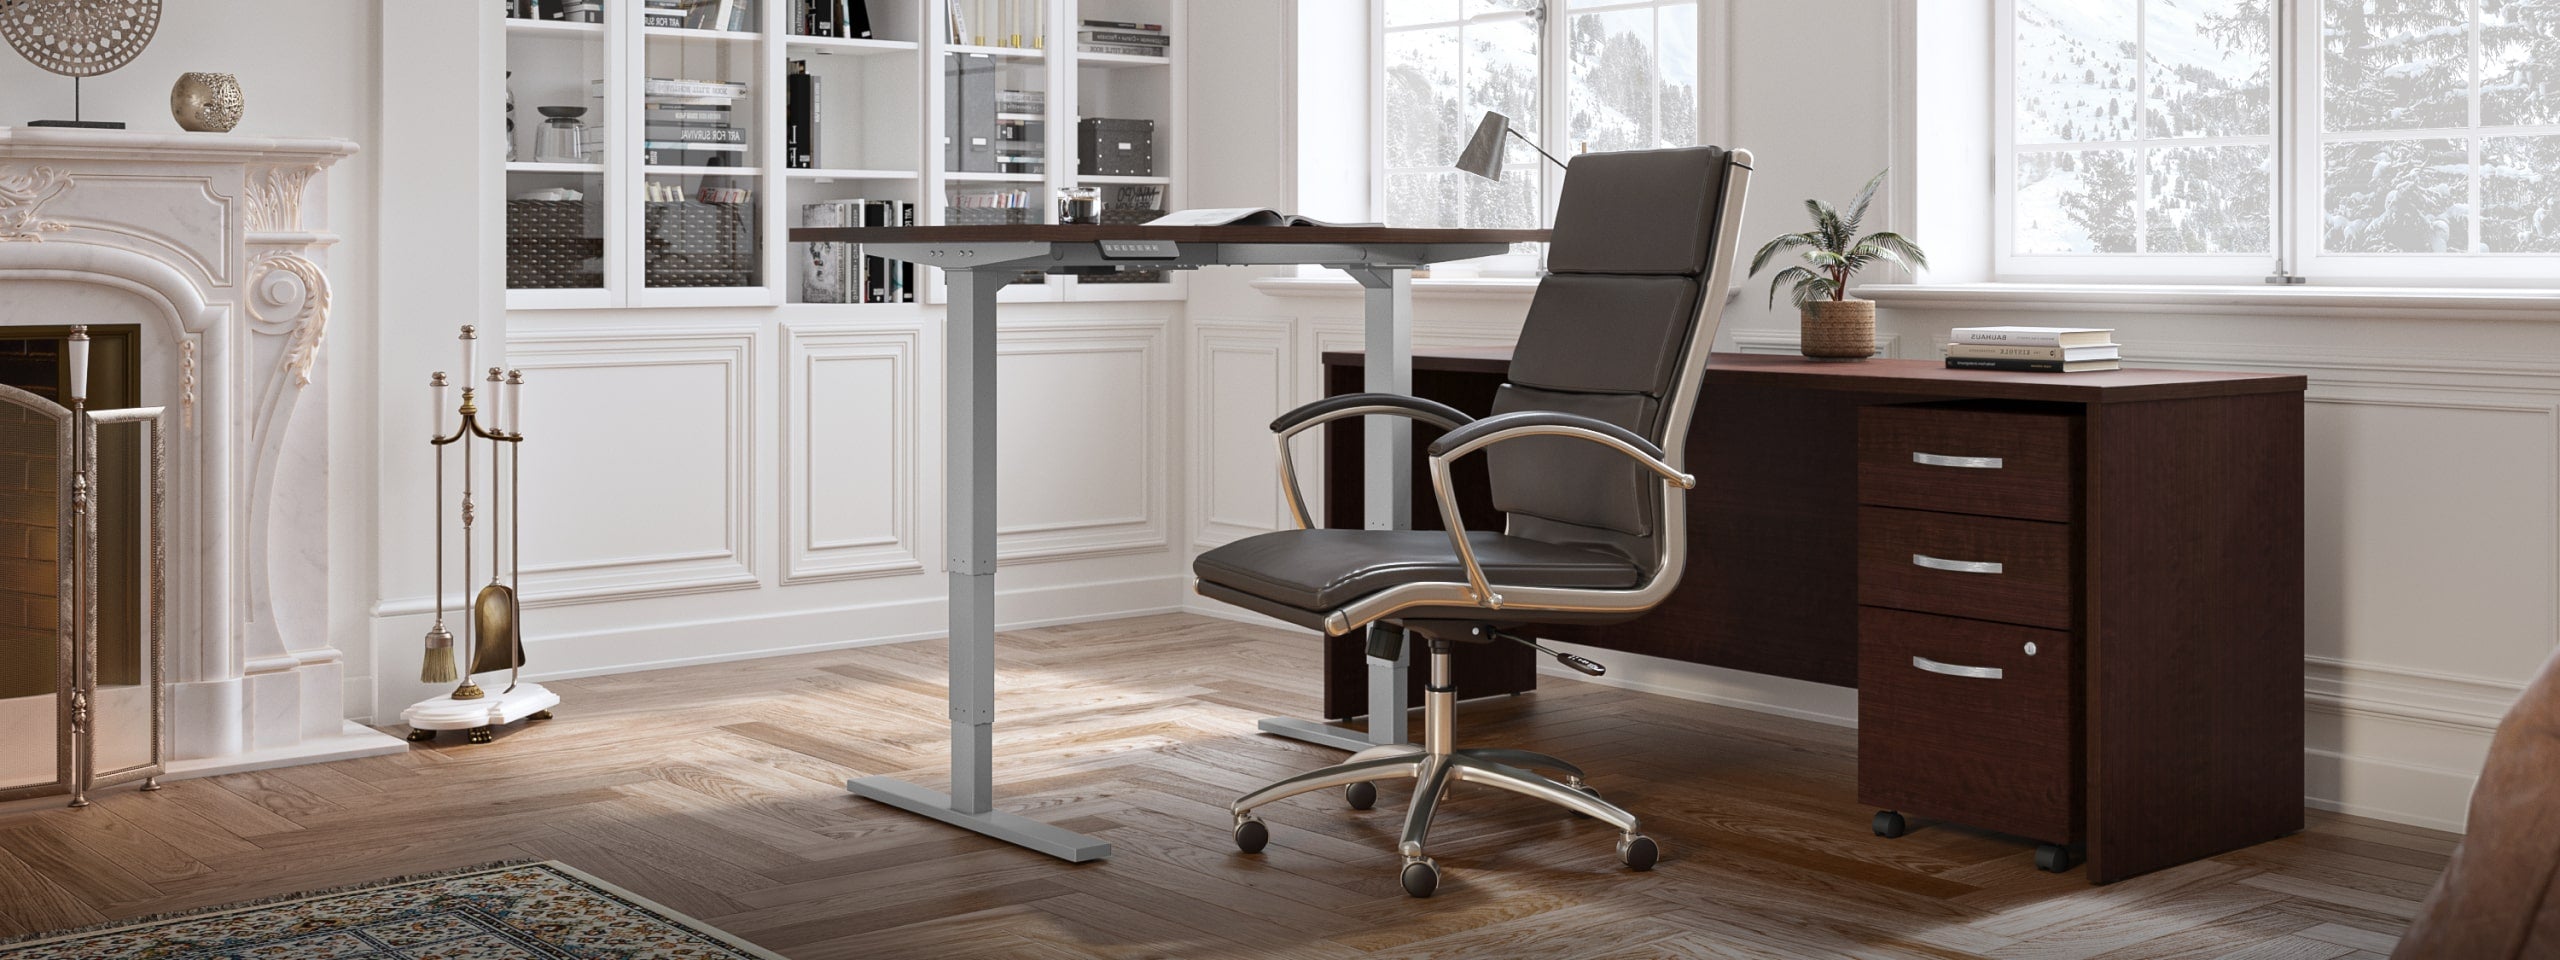 Series C Office Furniture Collection